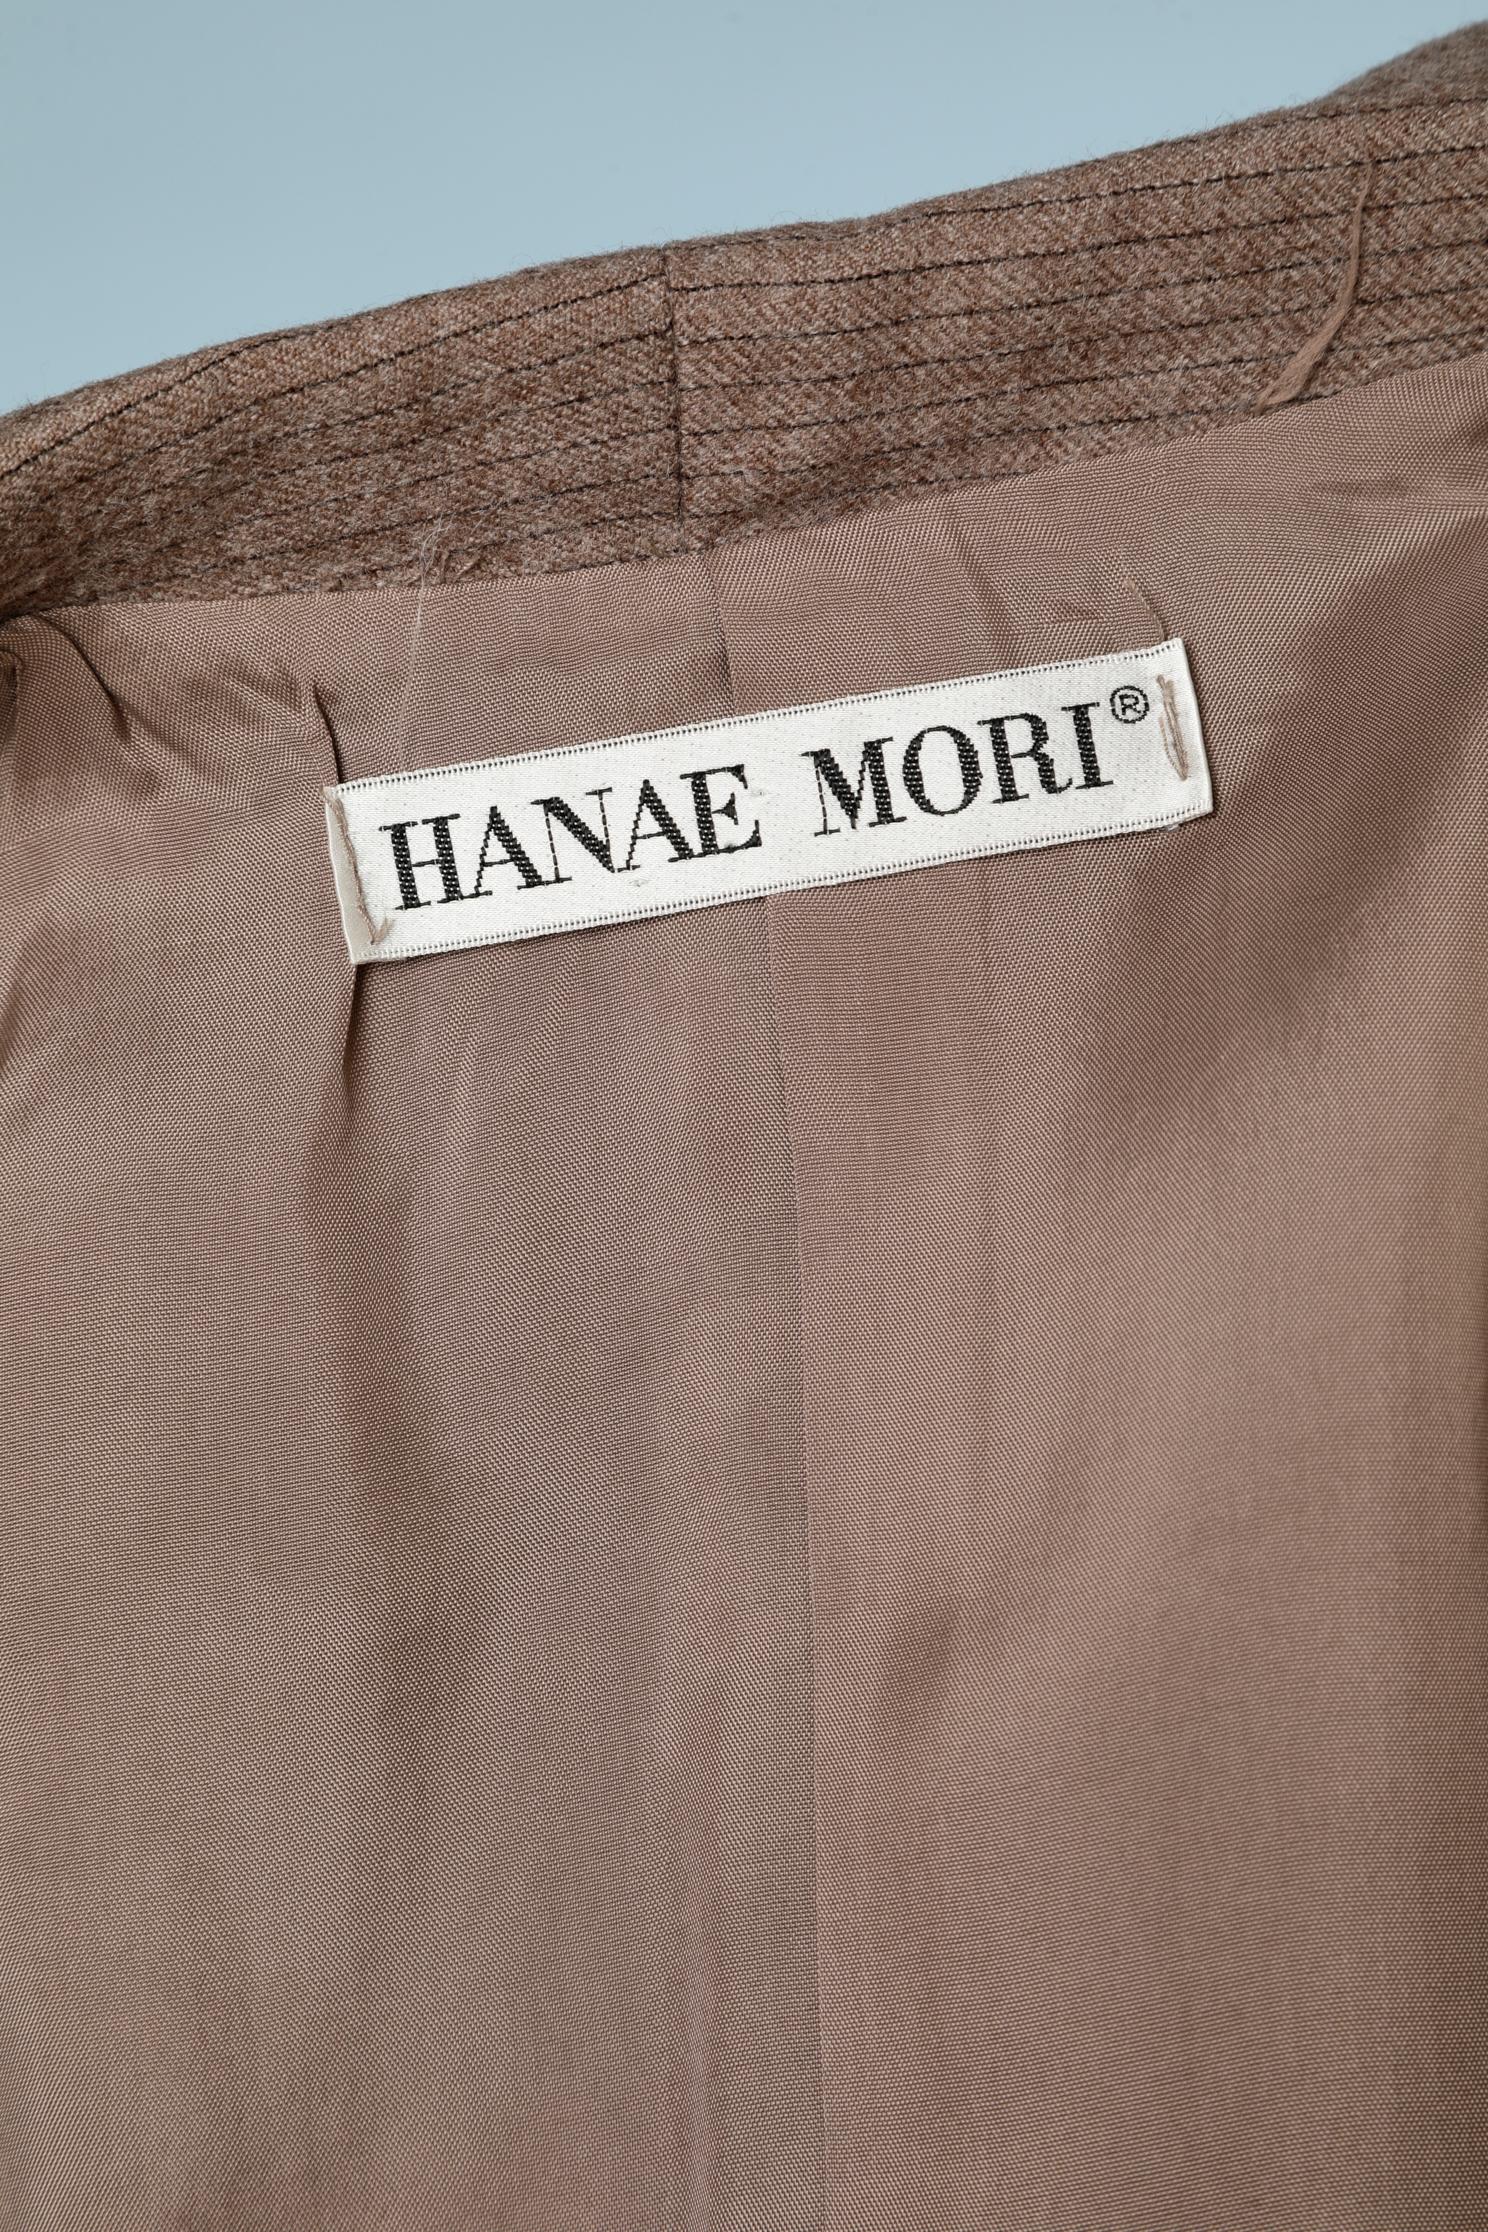 Light brown wool skirt suit with thin stripes Hanae Mori  For Sale 2